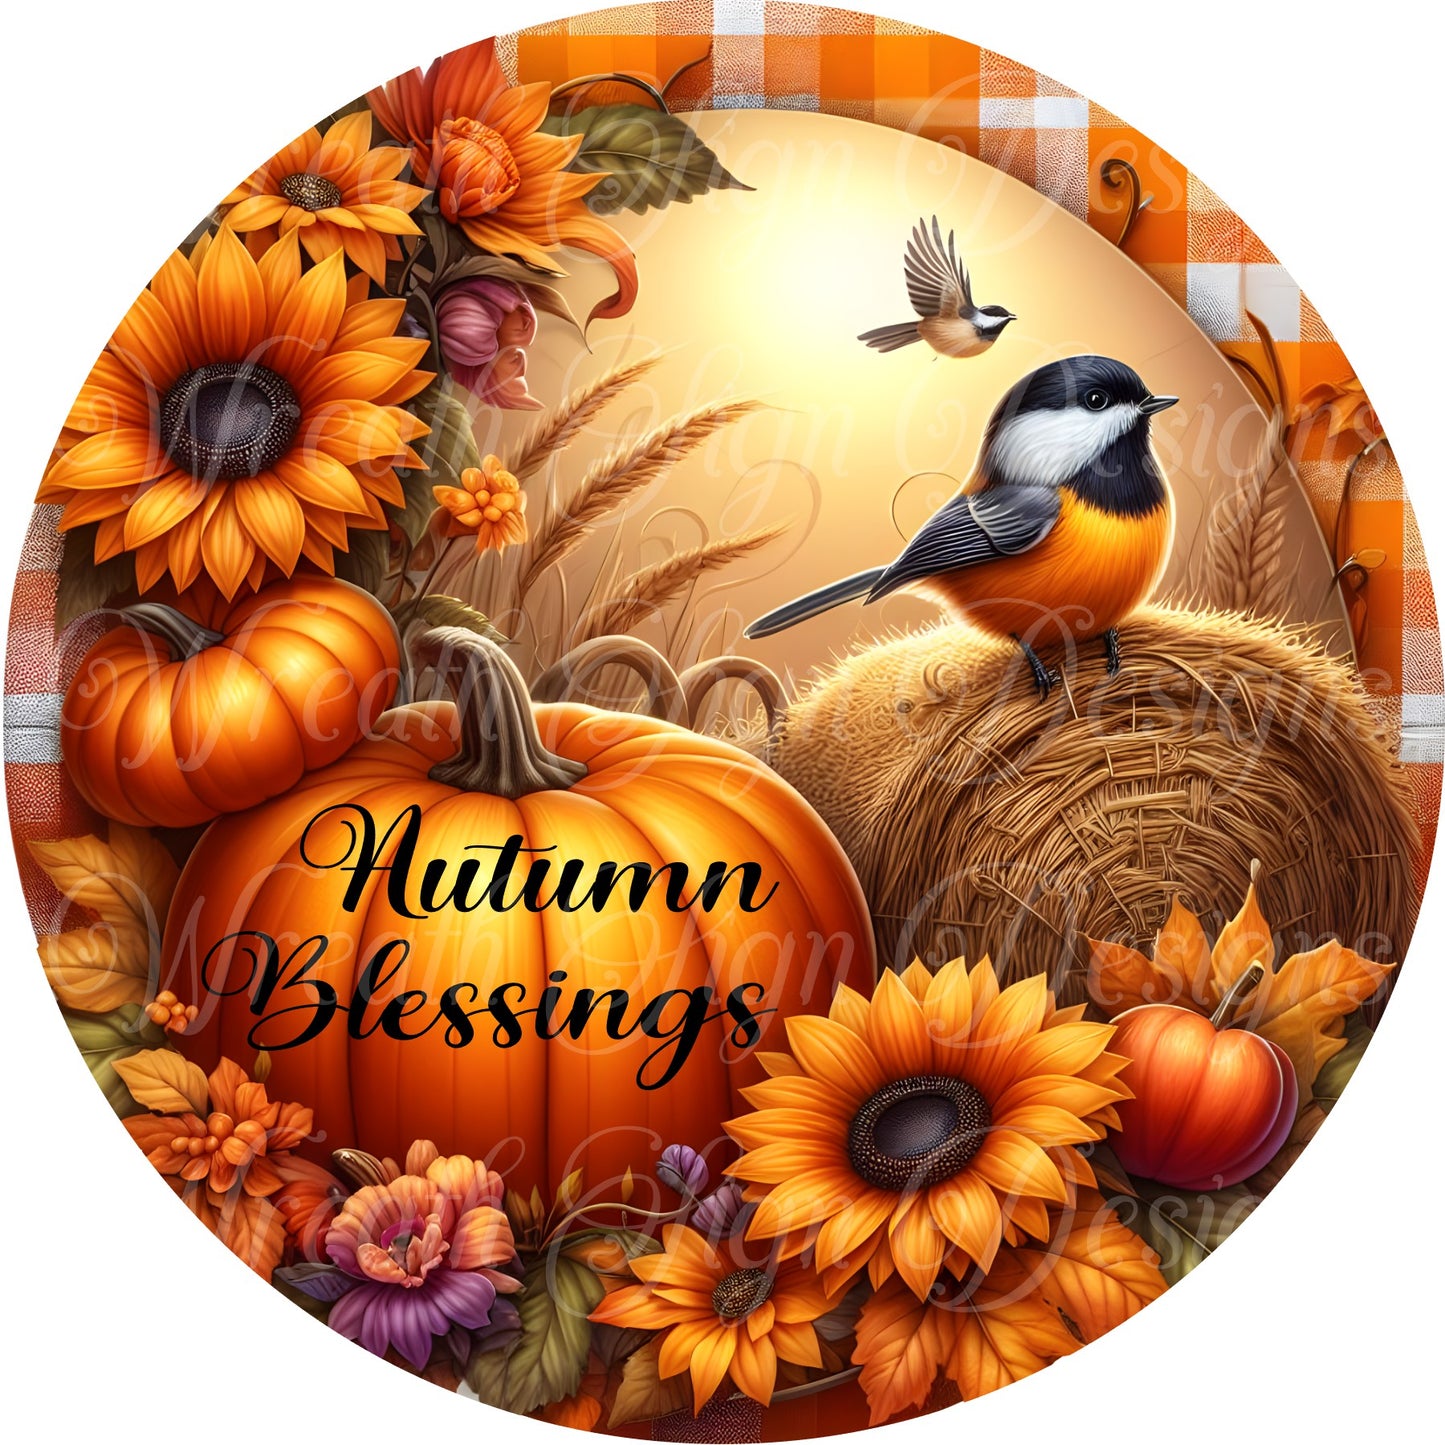 Autumn Blessings Fall wreath sign, Chickadee and pumpkins, Autumn harvest metal sign, round wreath center, wreath attachment